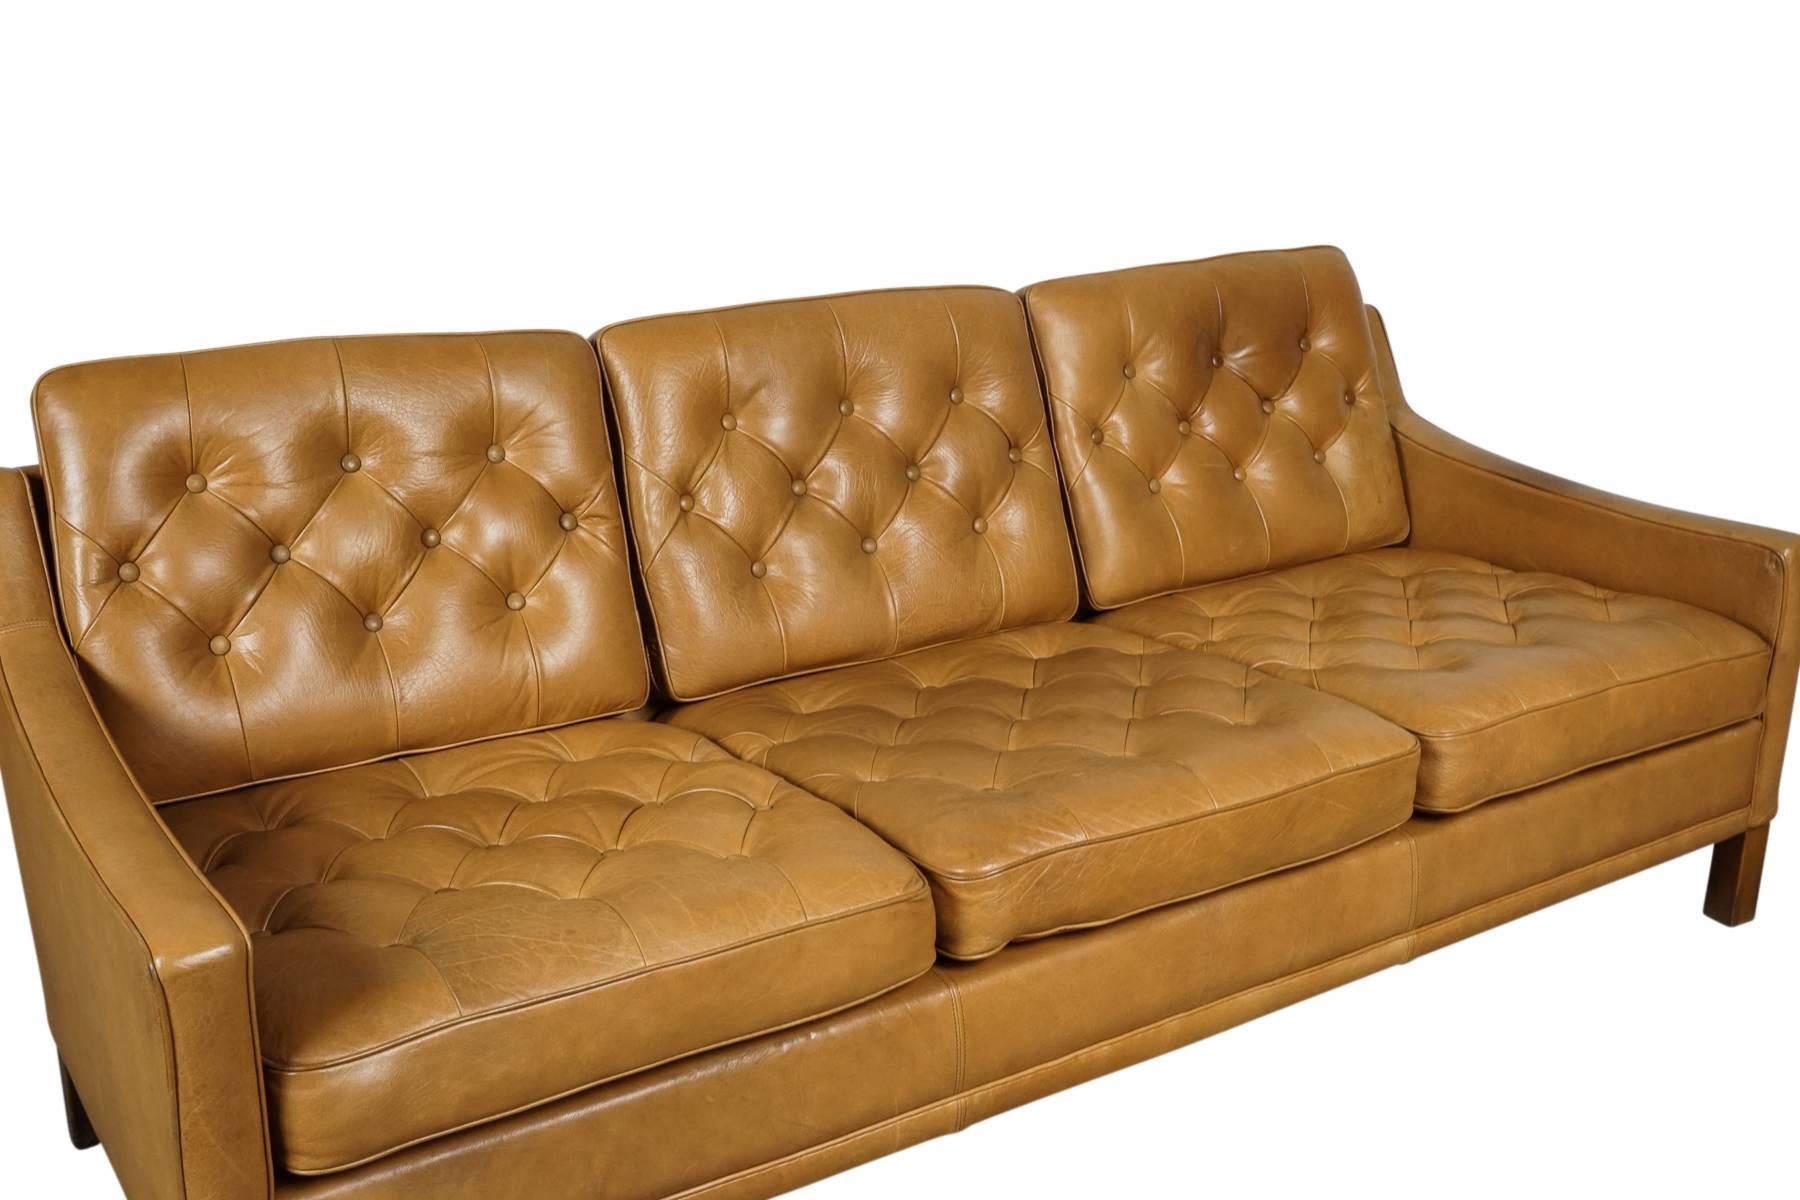 Swedish Mid-Century sofa designed by Ib Kofod-Larsen, manufactured by OPE. Cognac colored leather with buttoned cushions, circa 1960.